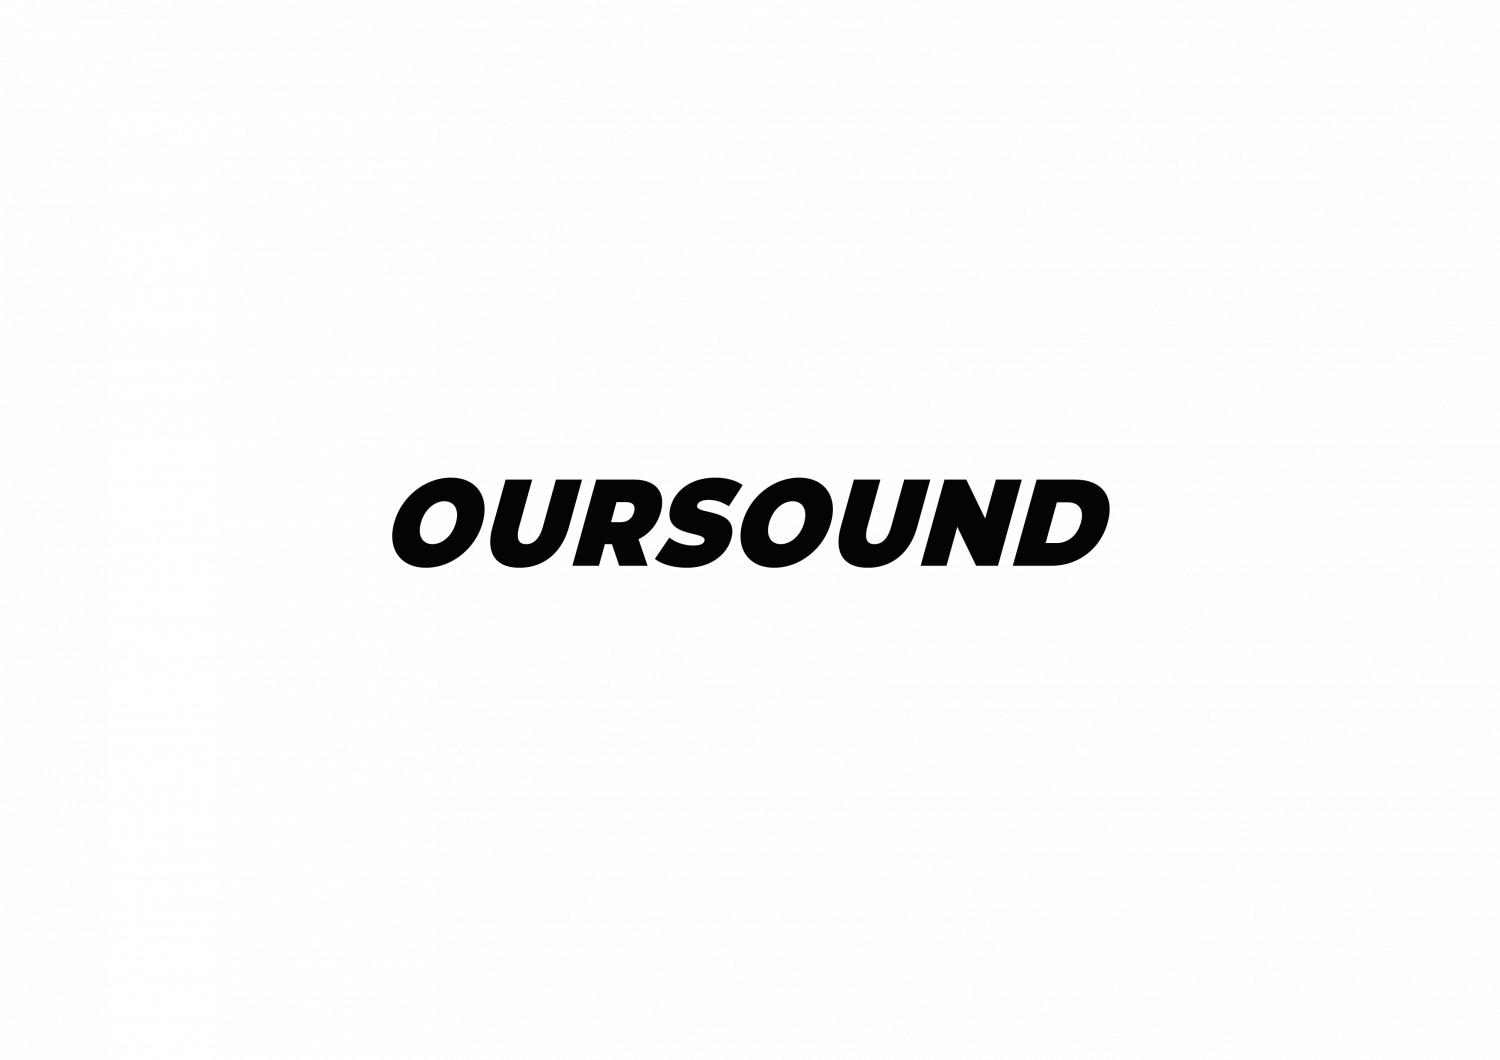 OURSOUND 로고_out_view.png.jpg